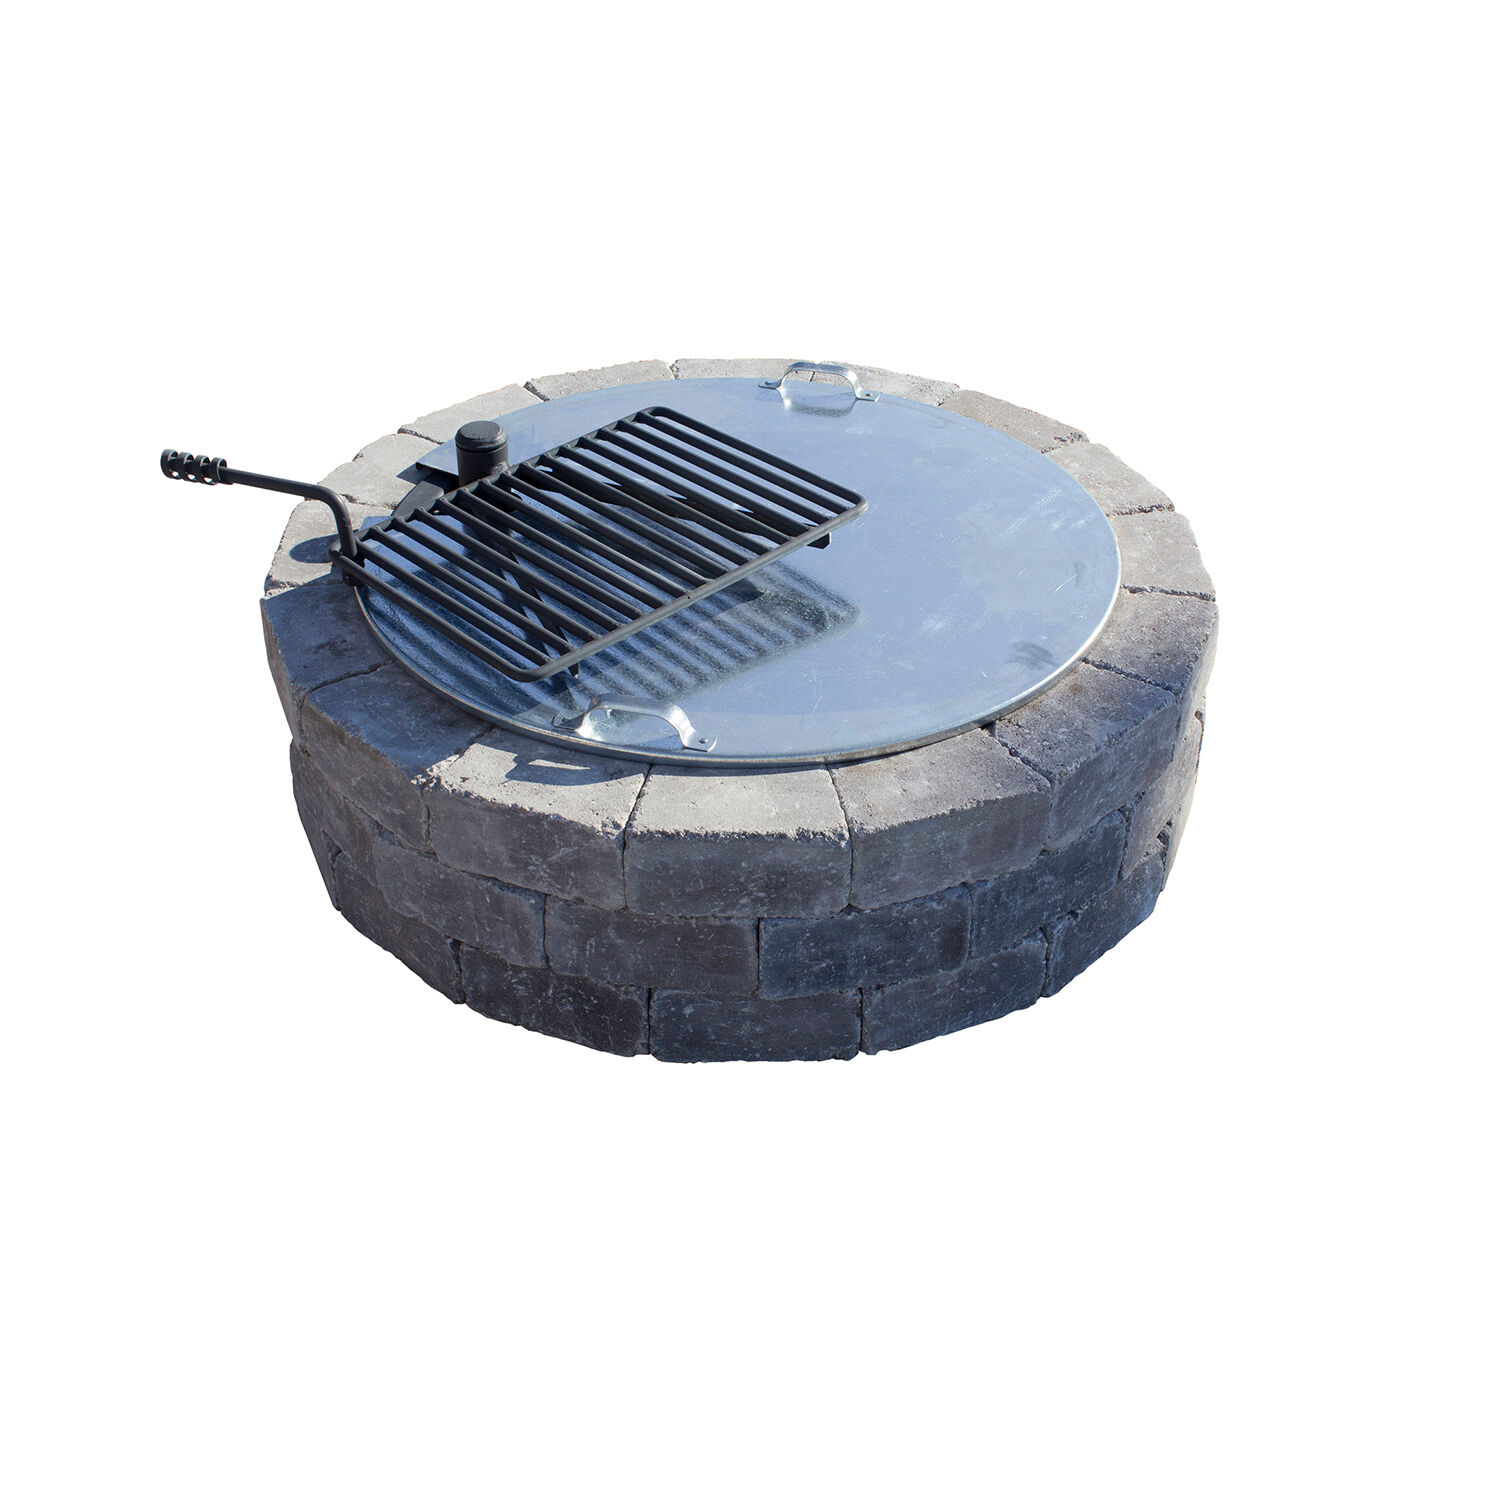 Masonry fire pit with steel lid and cooking grate